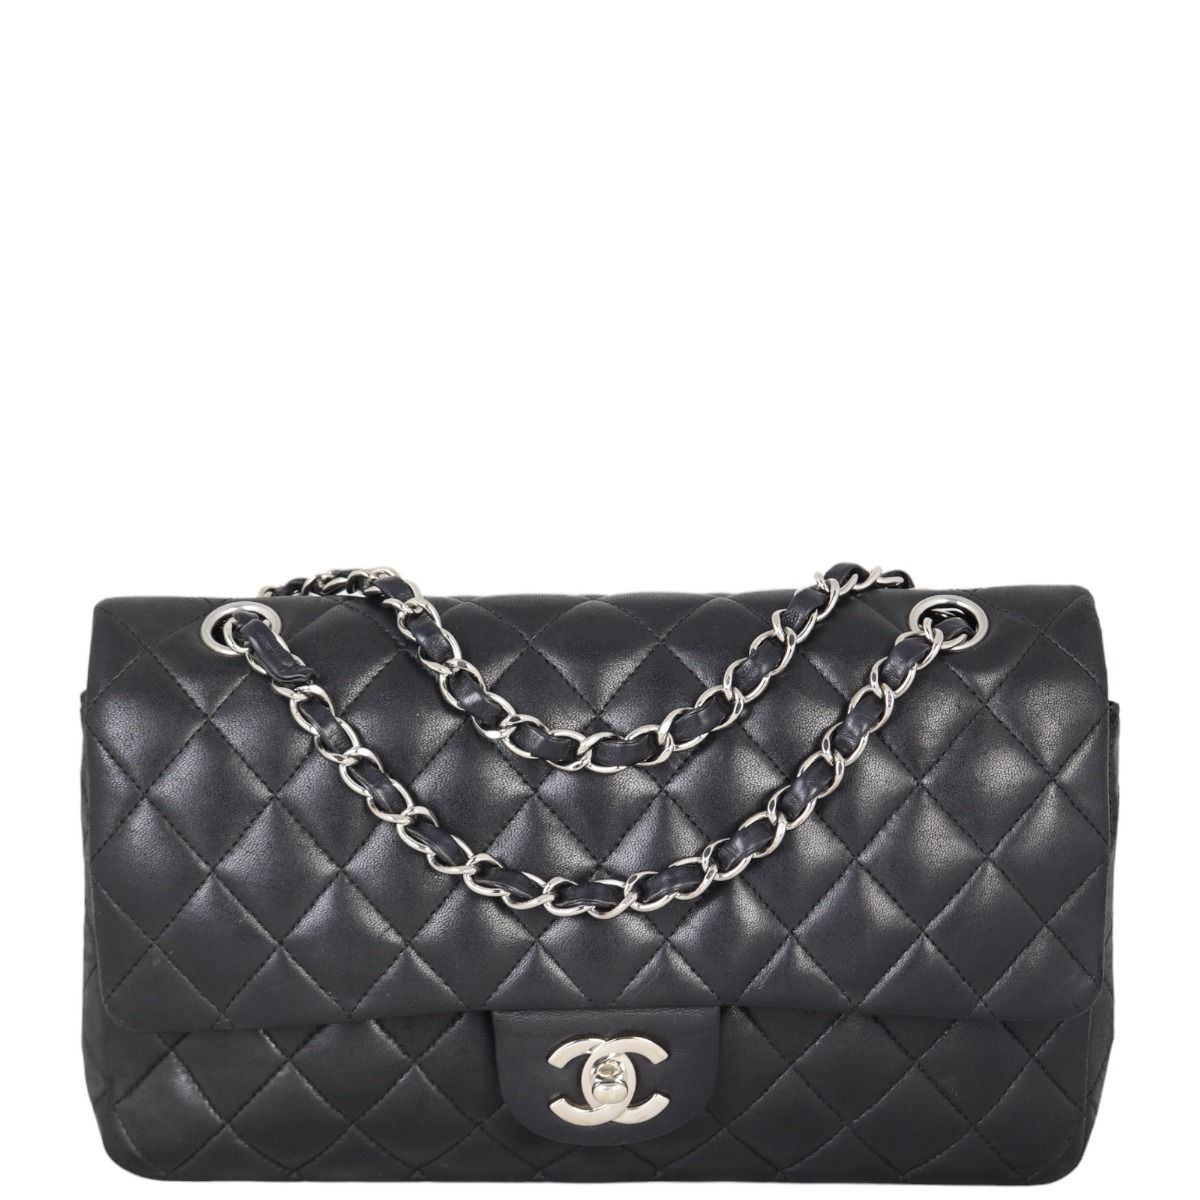 Chanel Bags for sale in Perth, Western Australia